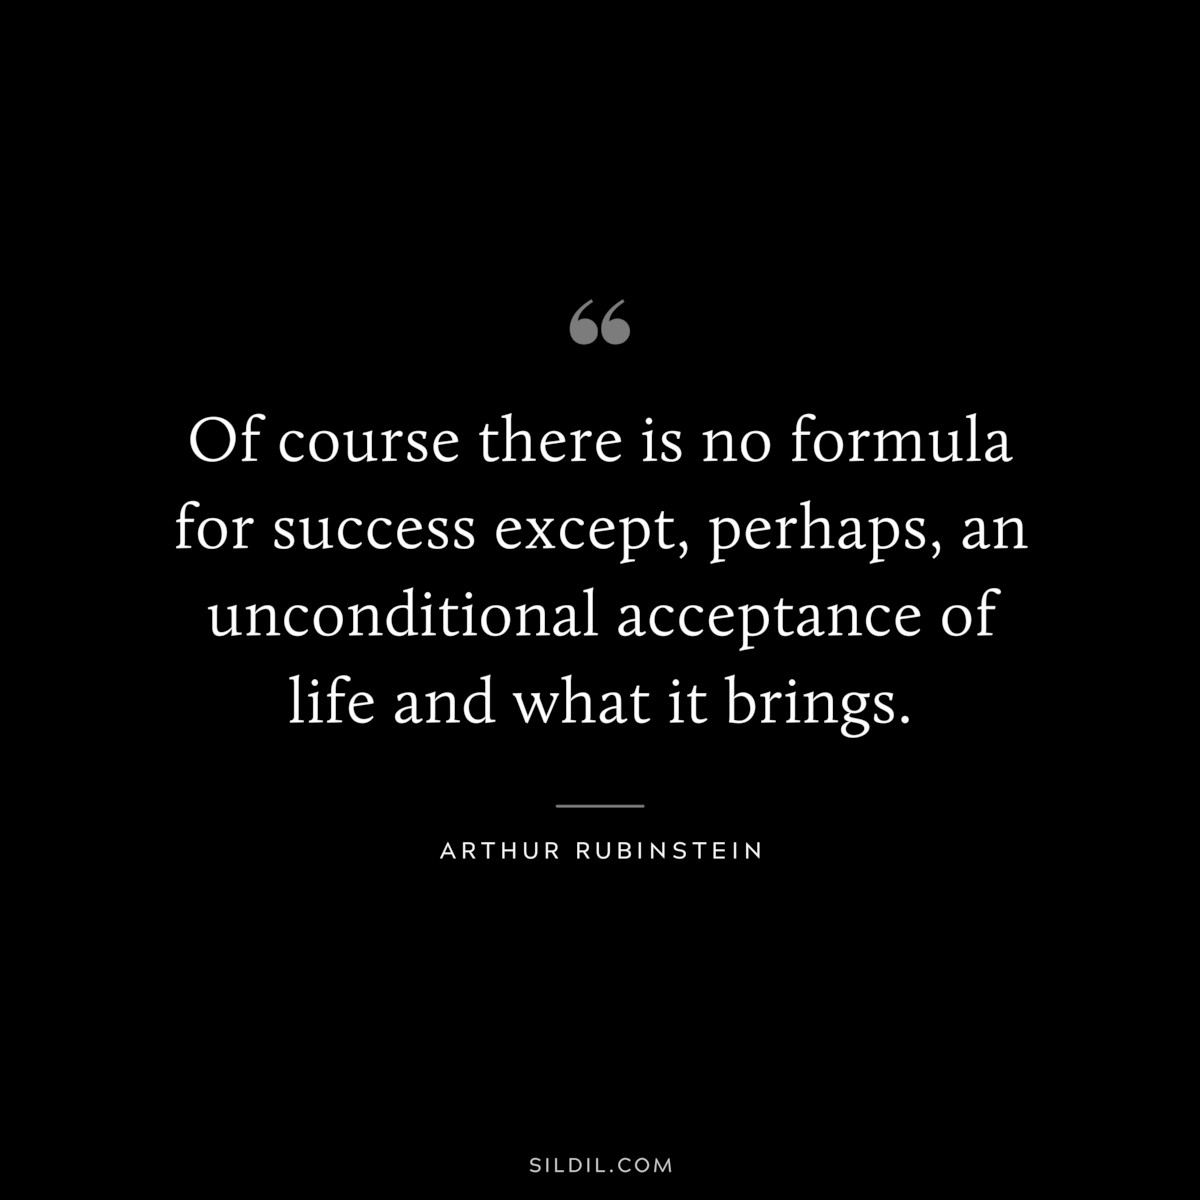 Of course there is no formula for success except, perhaps, an unconditional acceptance of life and what it brings. ― Arthur Rubinstein